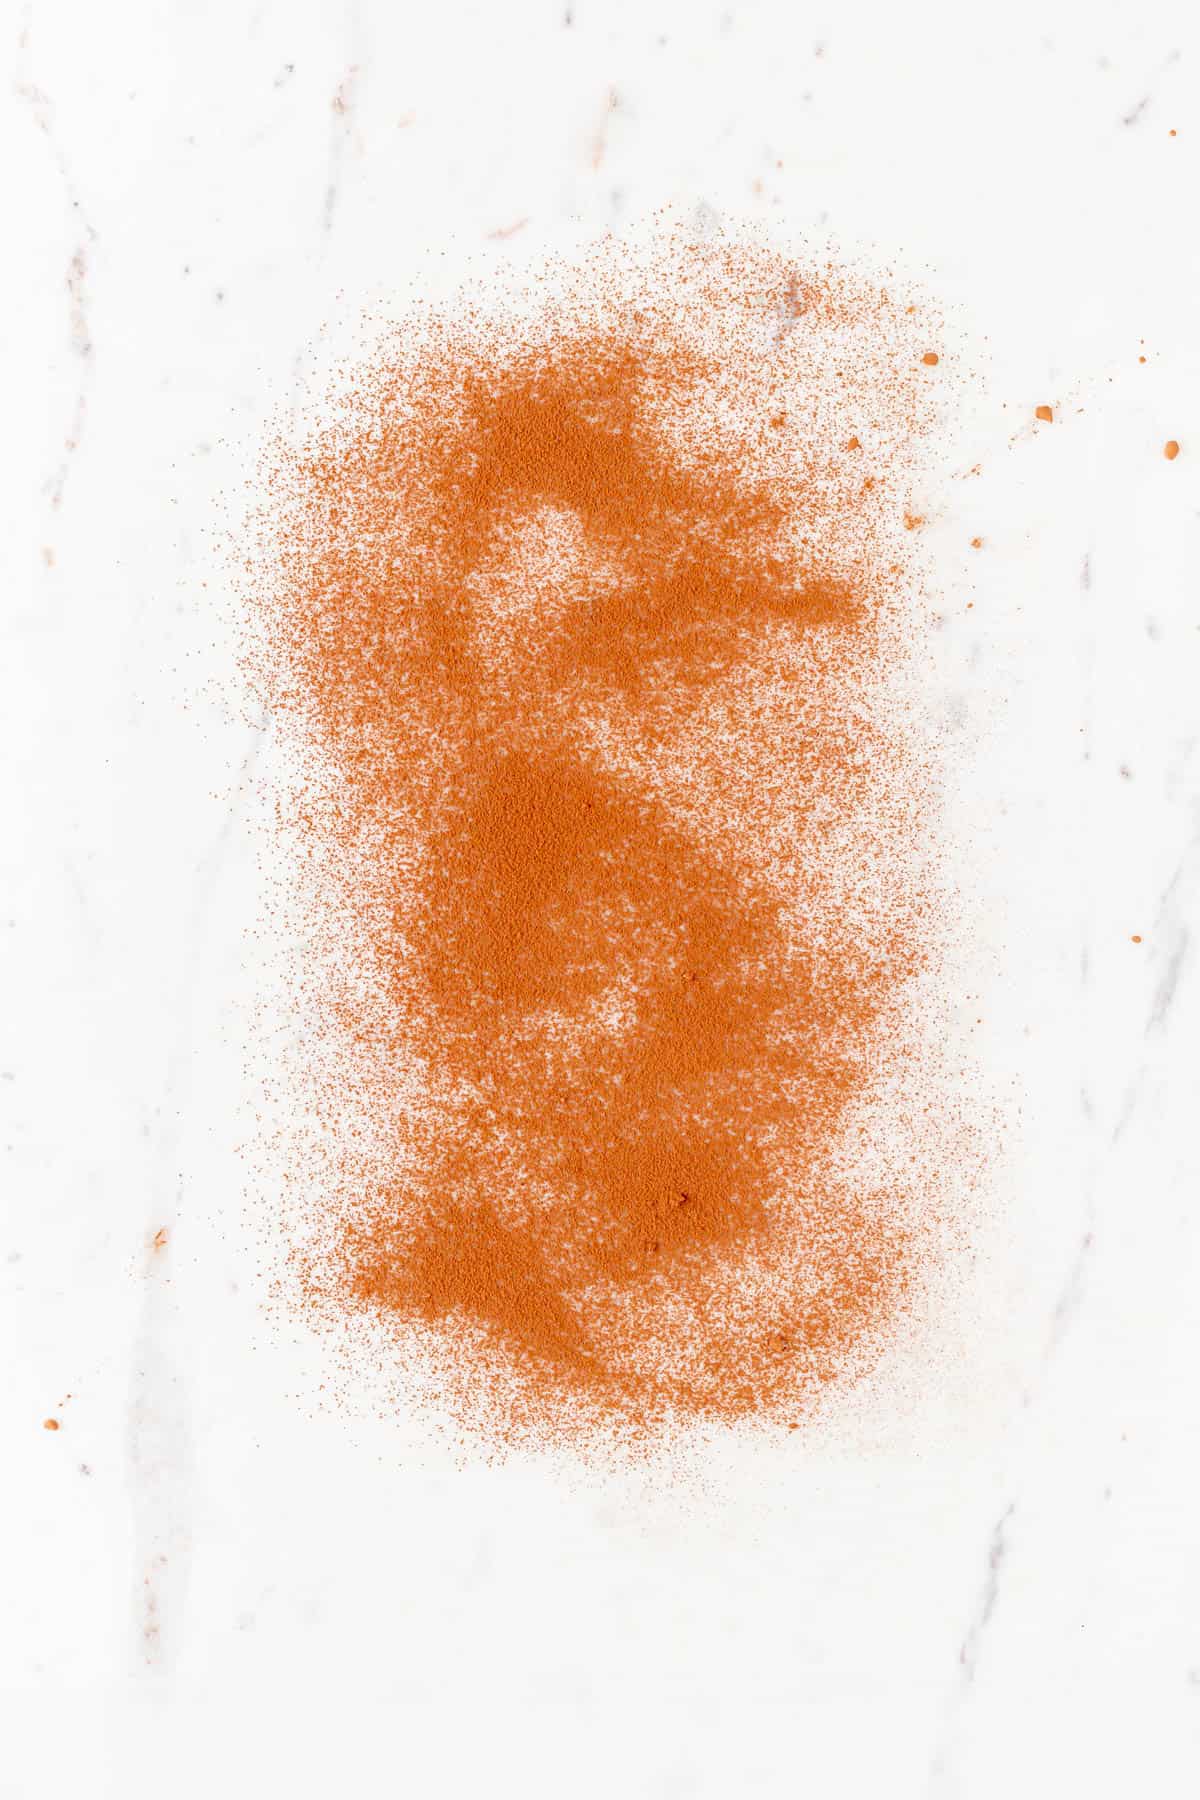 Cocoa powder dusted on a white marble surface.